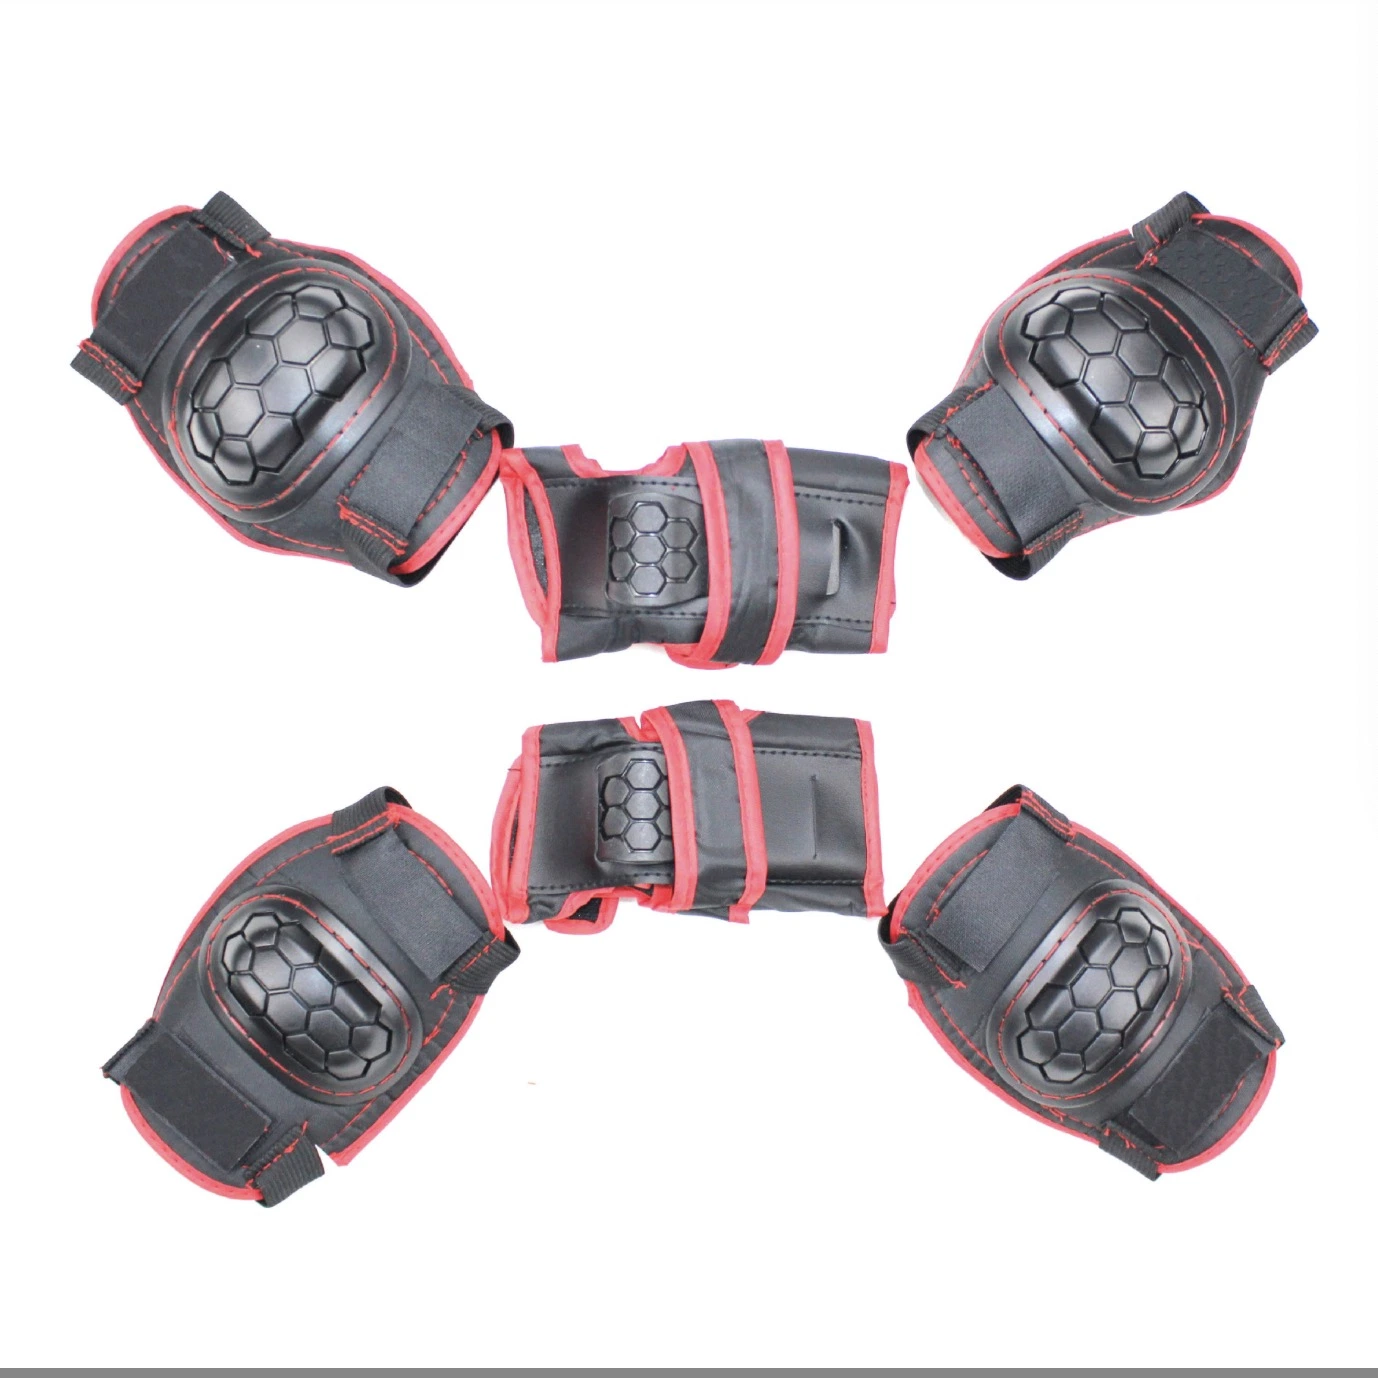 3 in 1 Kids Protector Elbow Knee Pad with Hot Sales in Europe Market